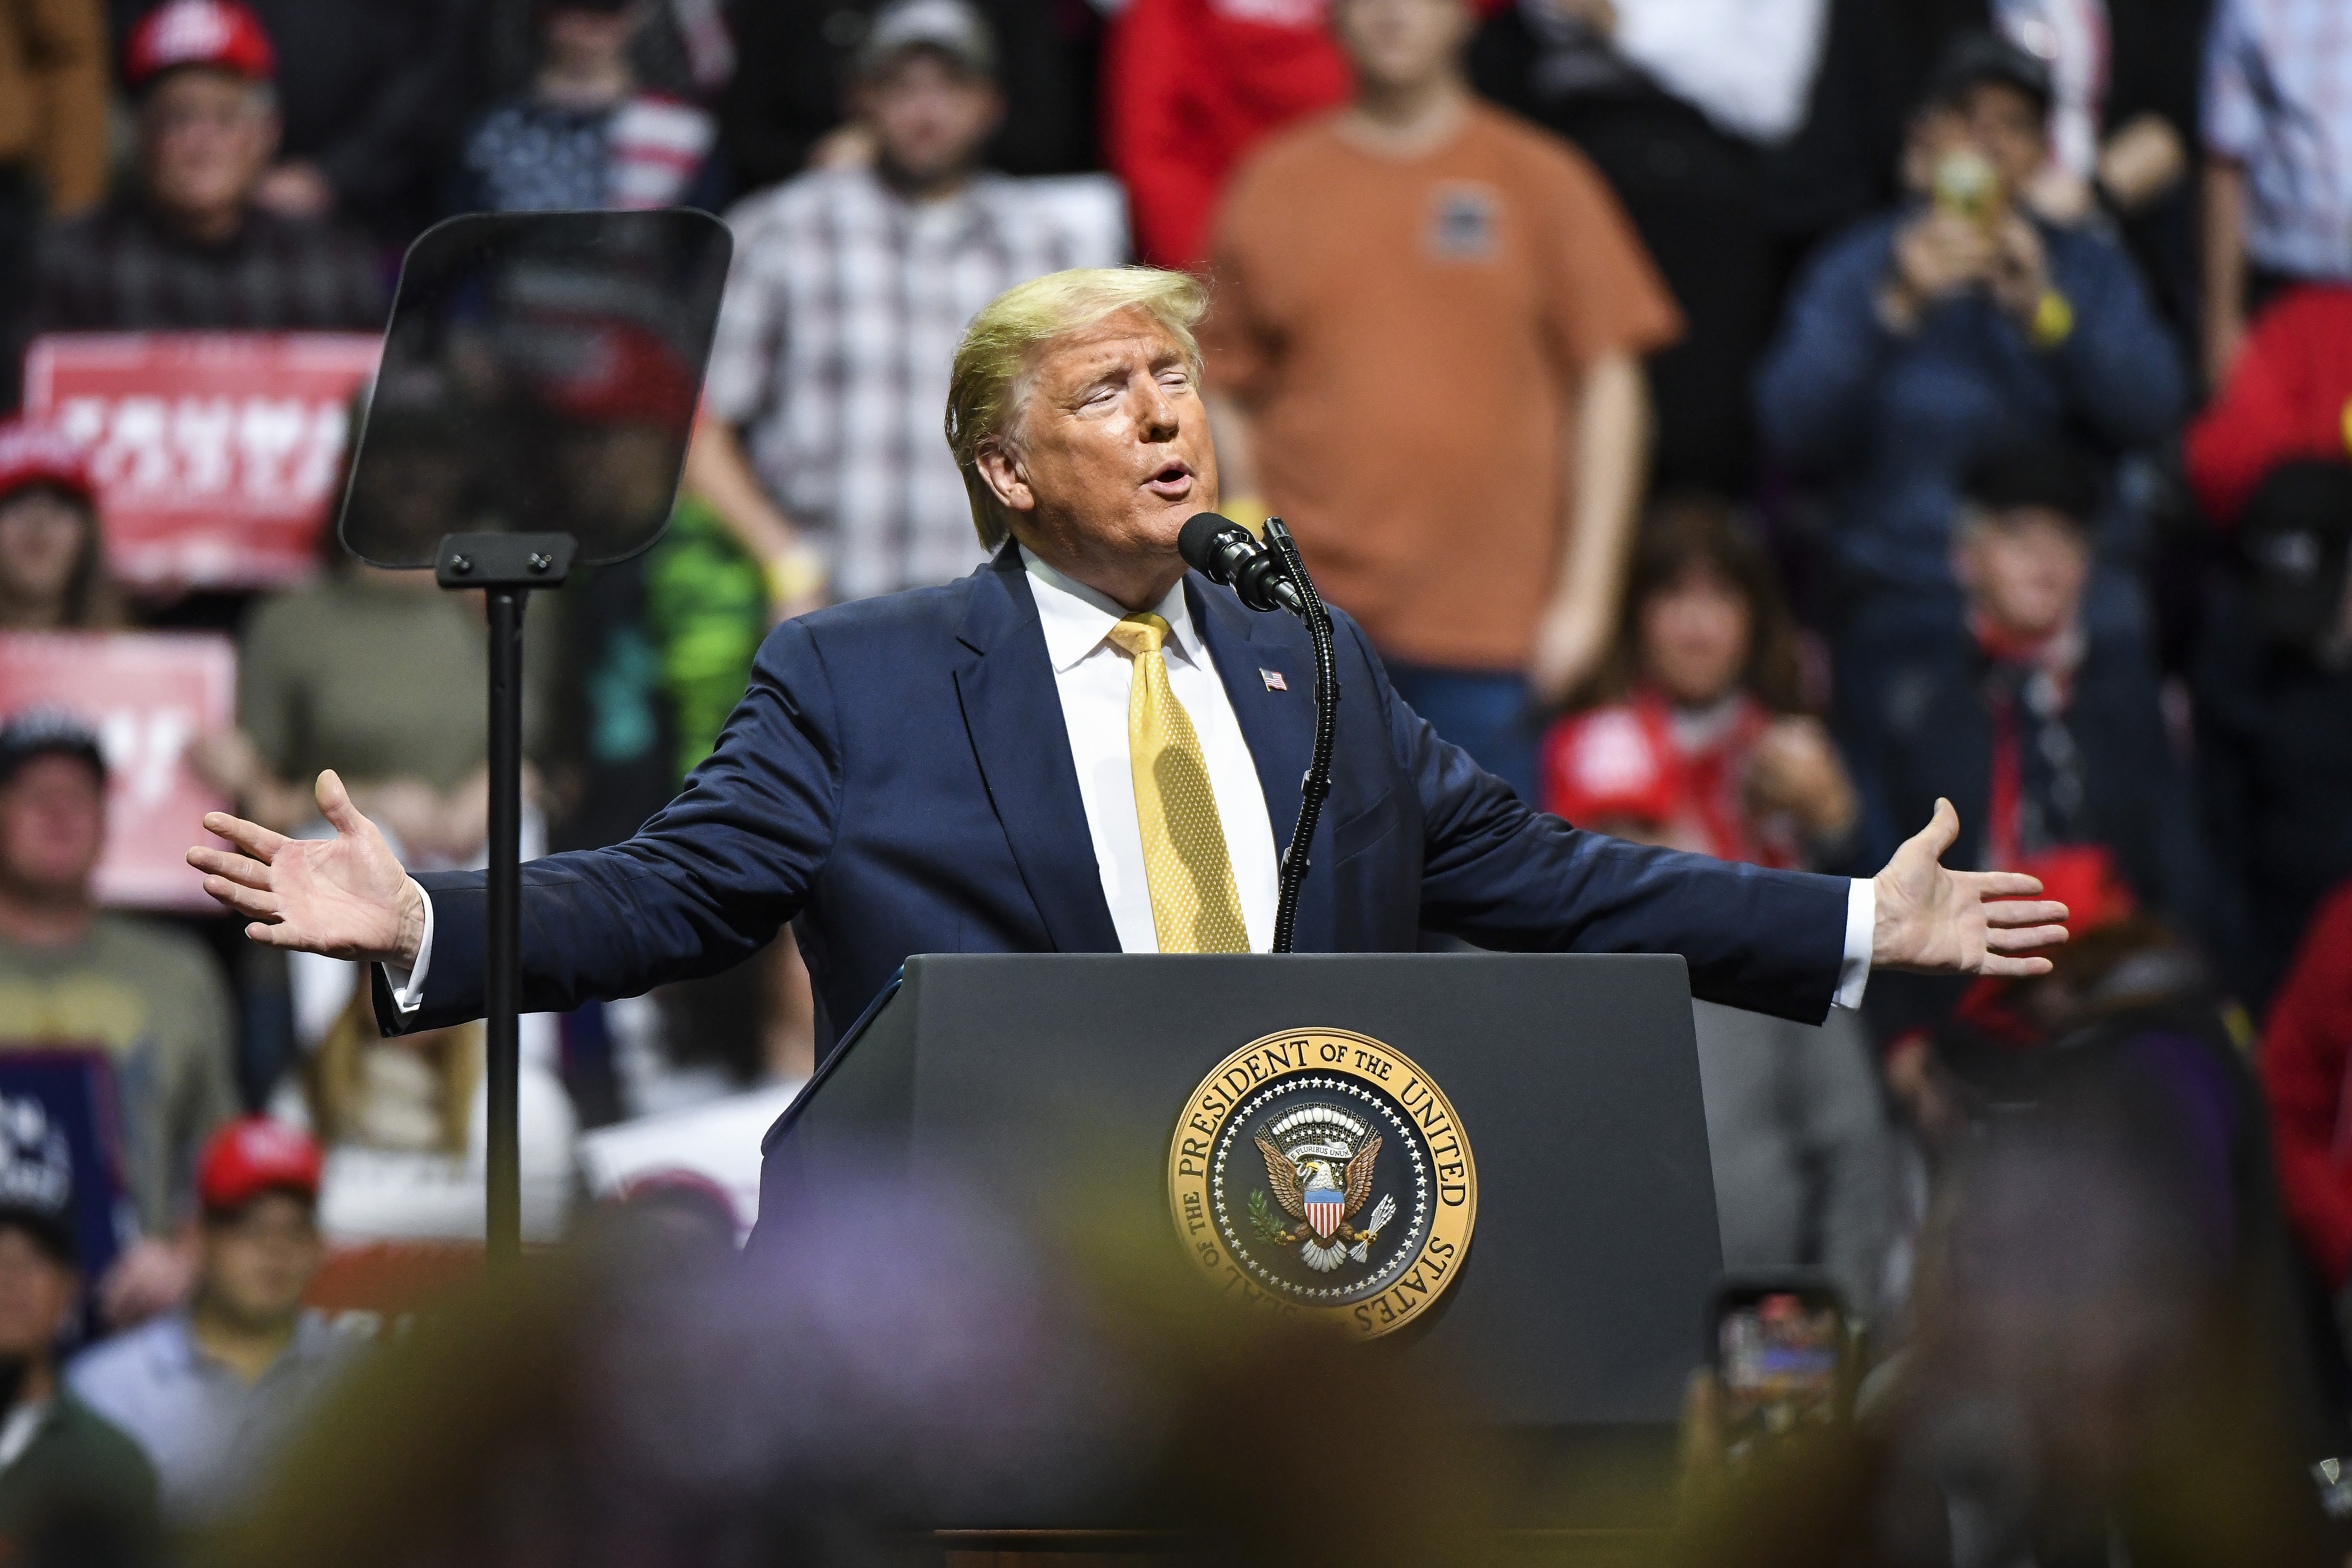 President Donald Trump speaks to supporters during a Keep America Great rally on February 20, 2020 in Colorado Springs, Colorado. Vice President Mike Pence and Sen. Cory Gardner, a first-term Republican up for reelection this year, joined Trump at the rally.